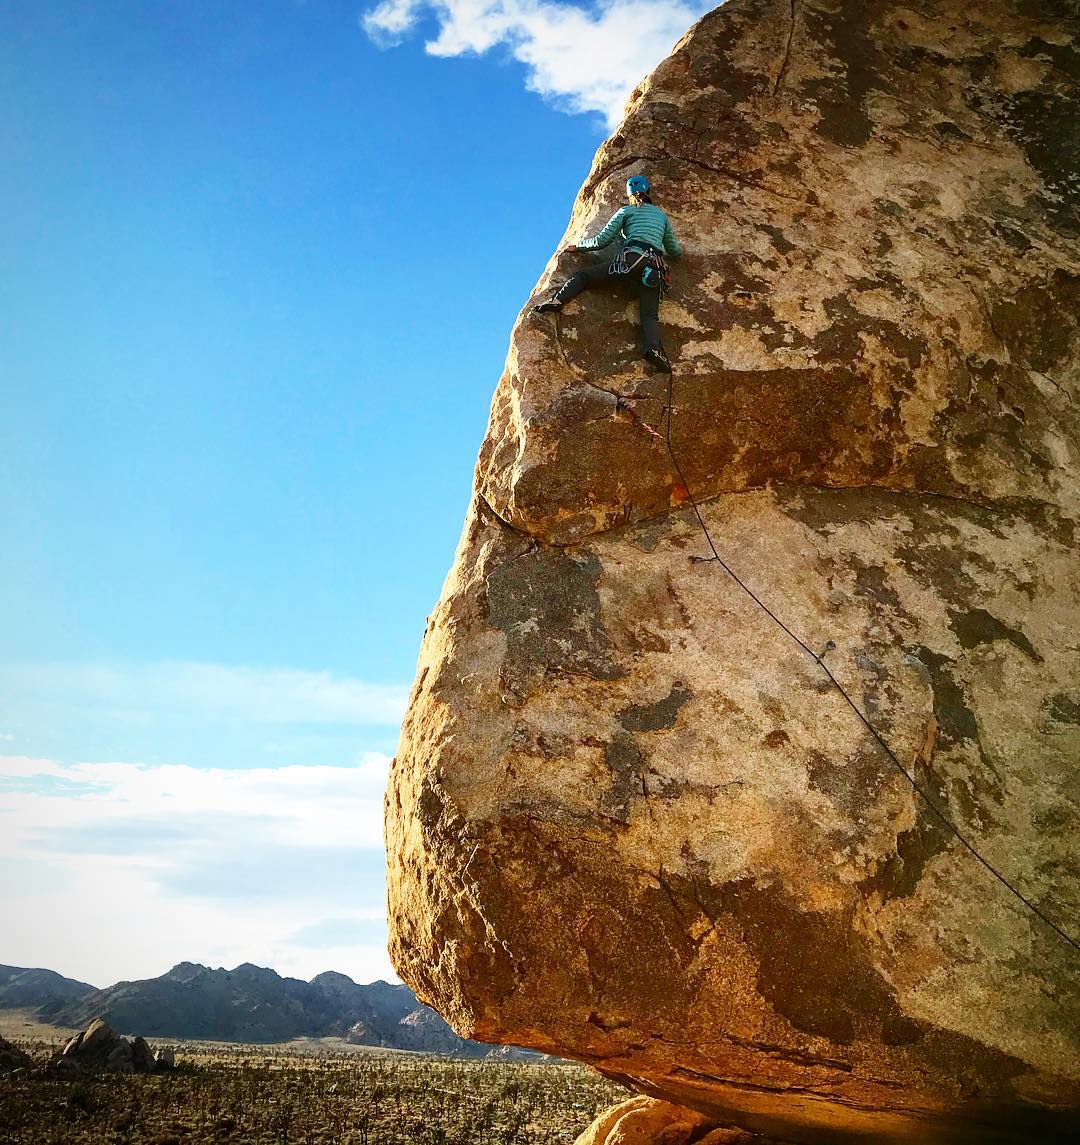 Woman Free Climbing a Cliff at Joshua Tree National Park. Photo by Instagram user @laura.adventures